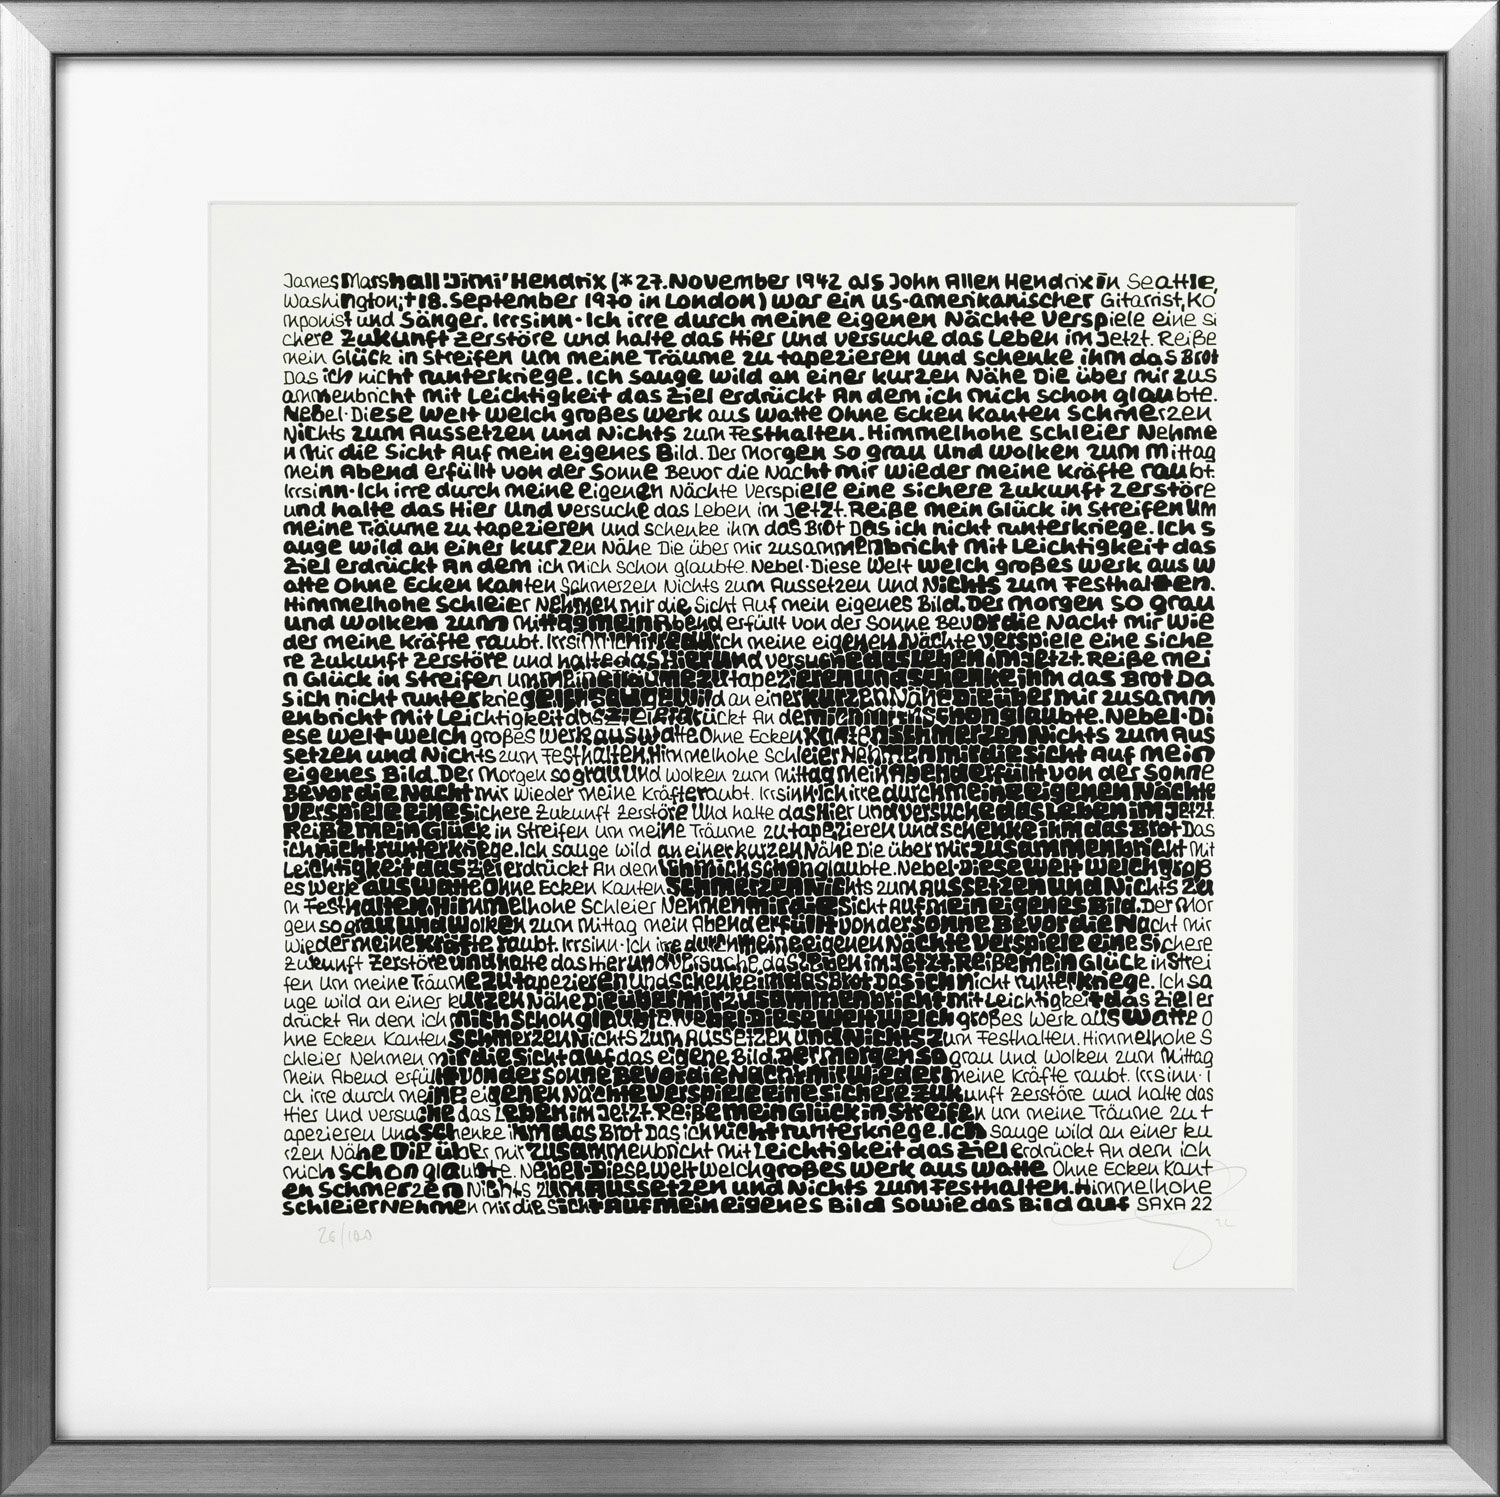 Picture "Jimi Hendrix" (2022), framed by SAXA